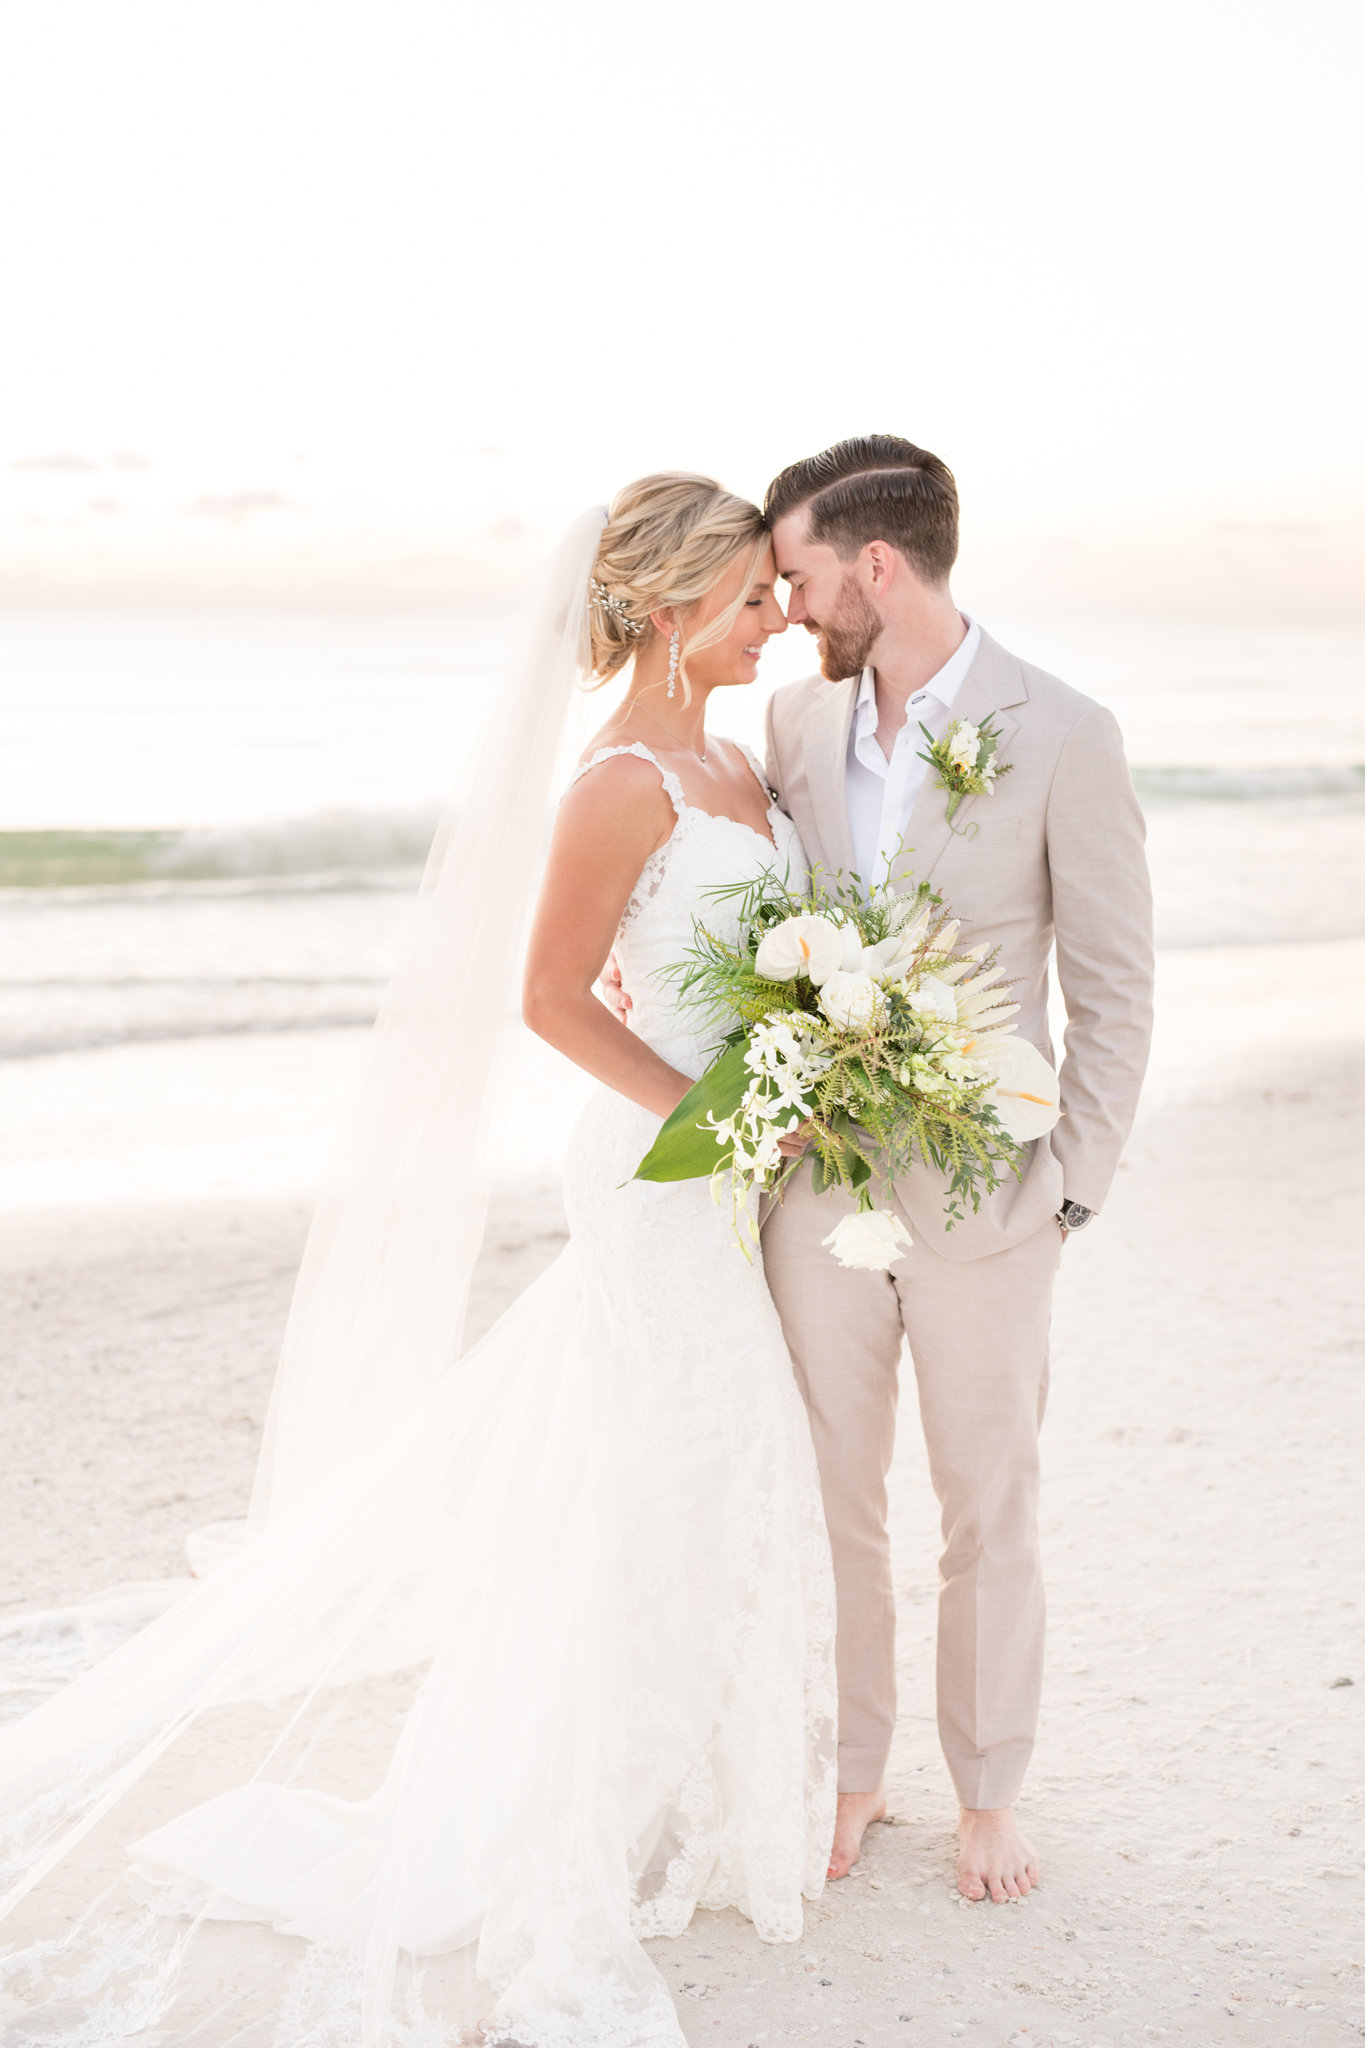 Bride and groom cuddle on the beach.